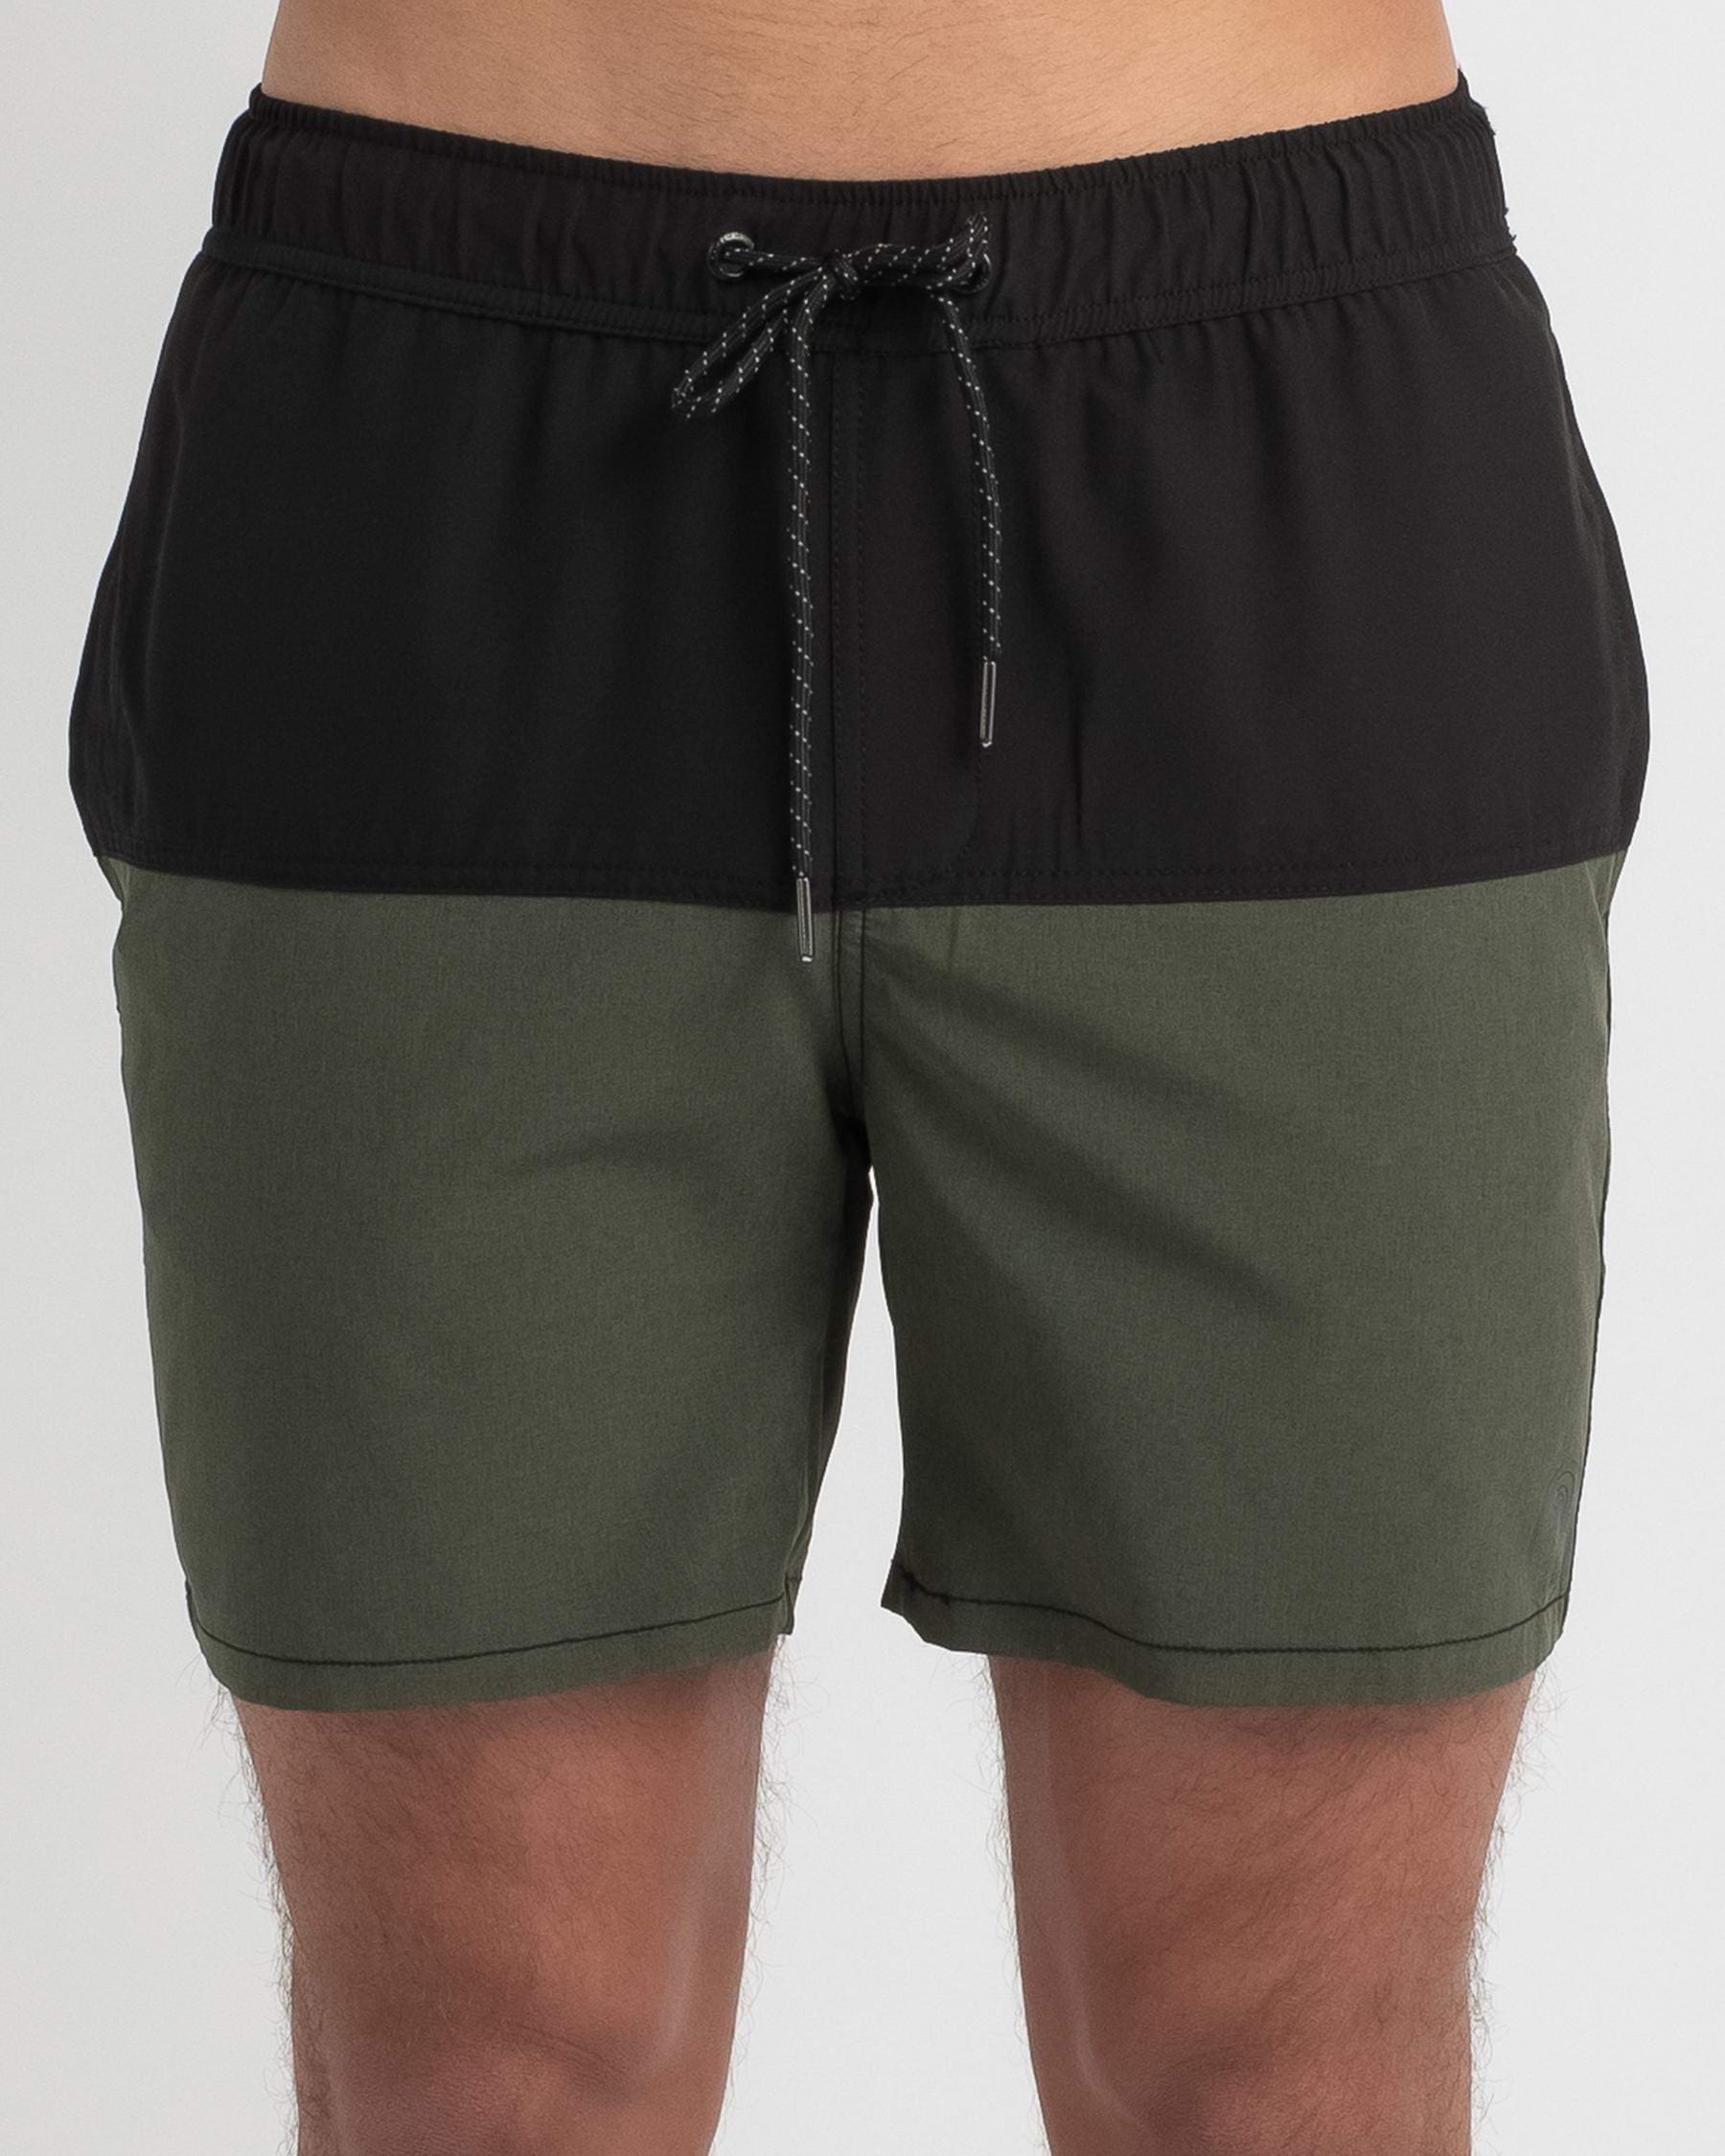 Sparta Reaction Mully Shorts In Black/olive - Fast Shipping & Easy ...